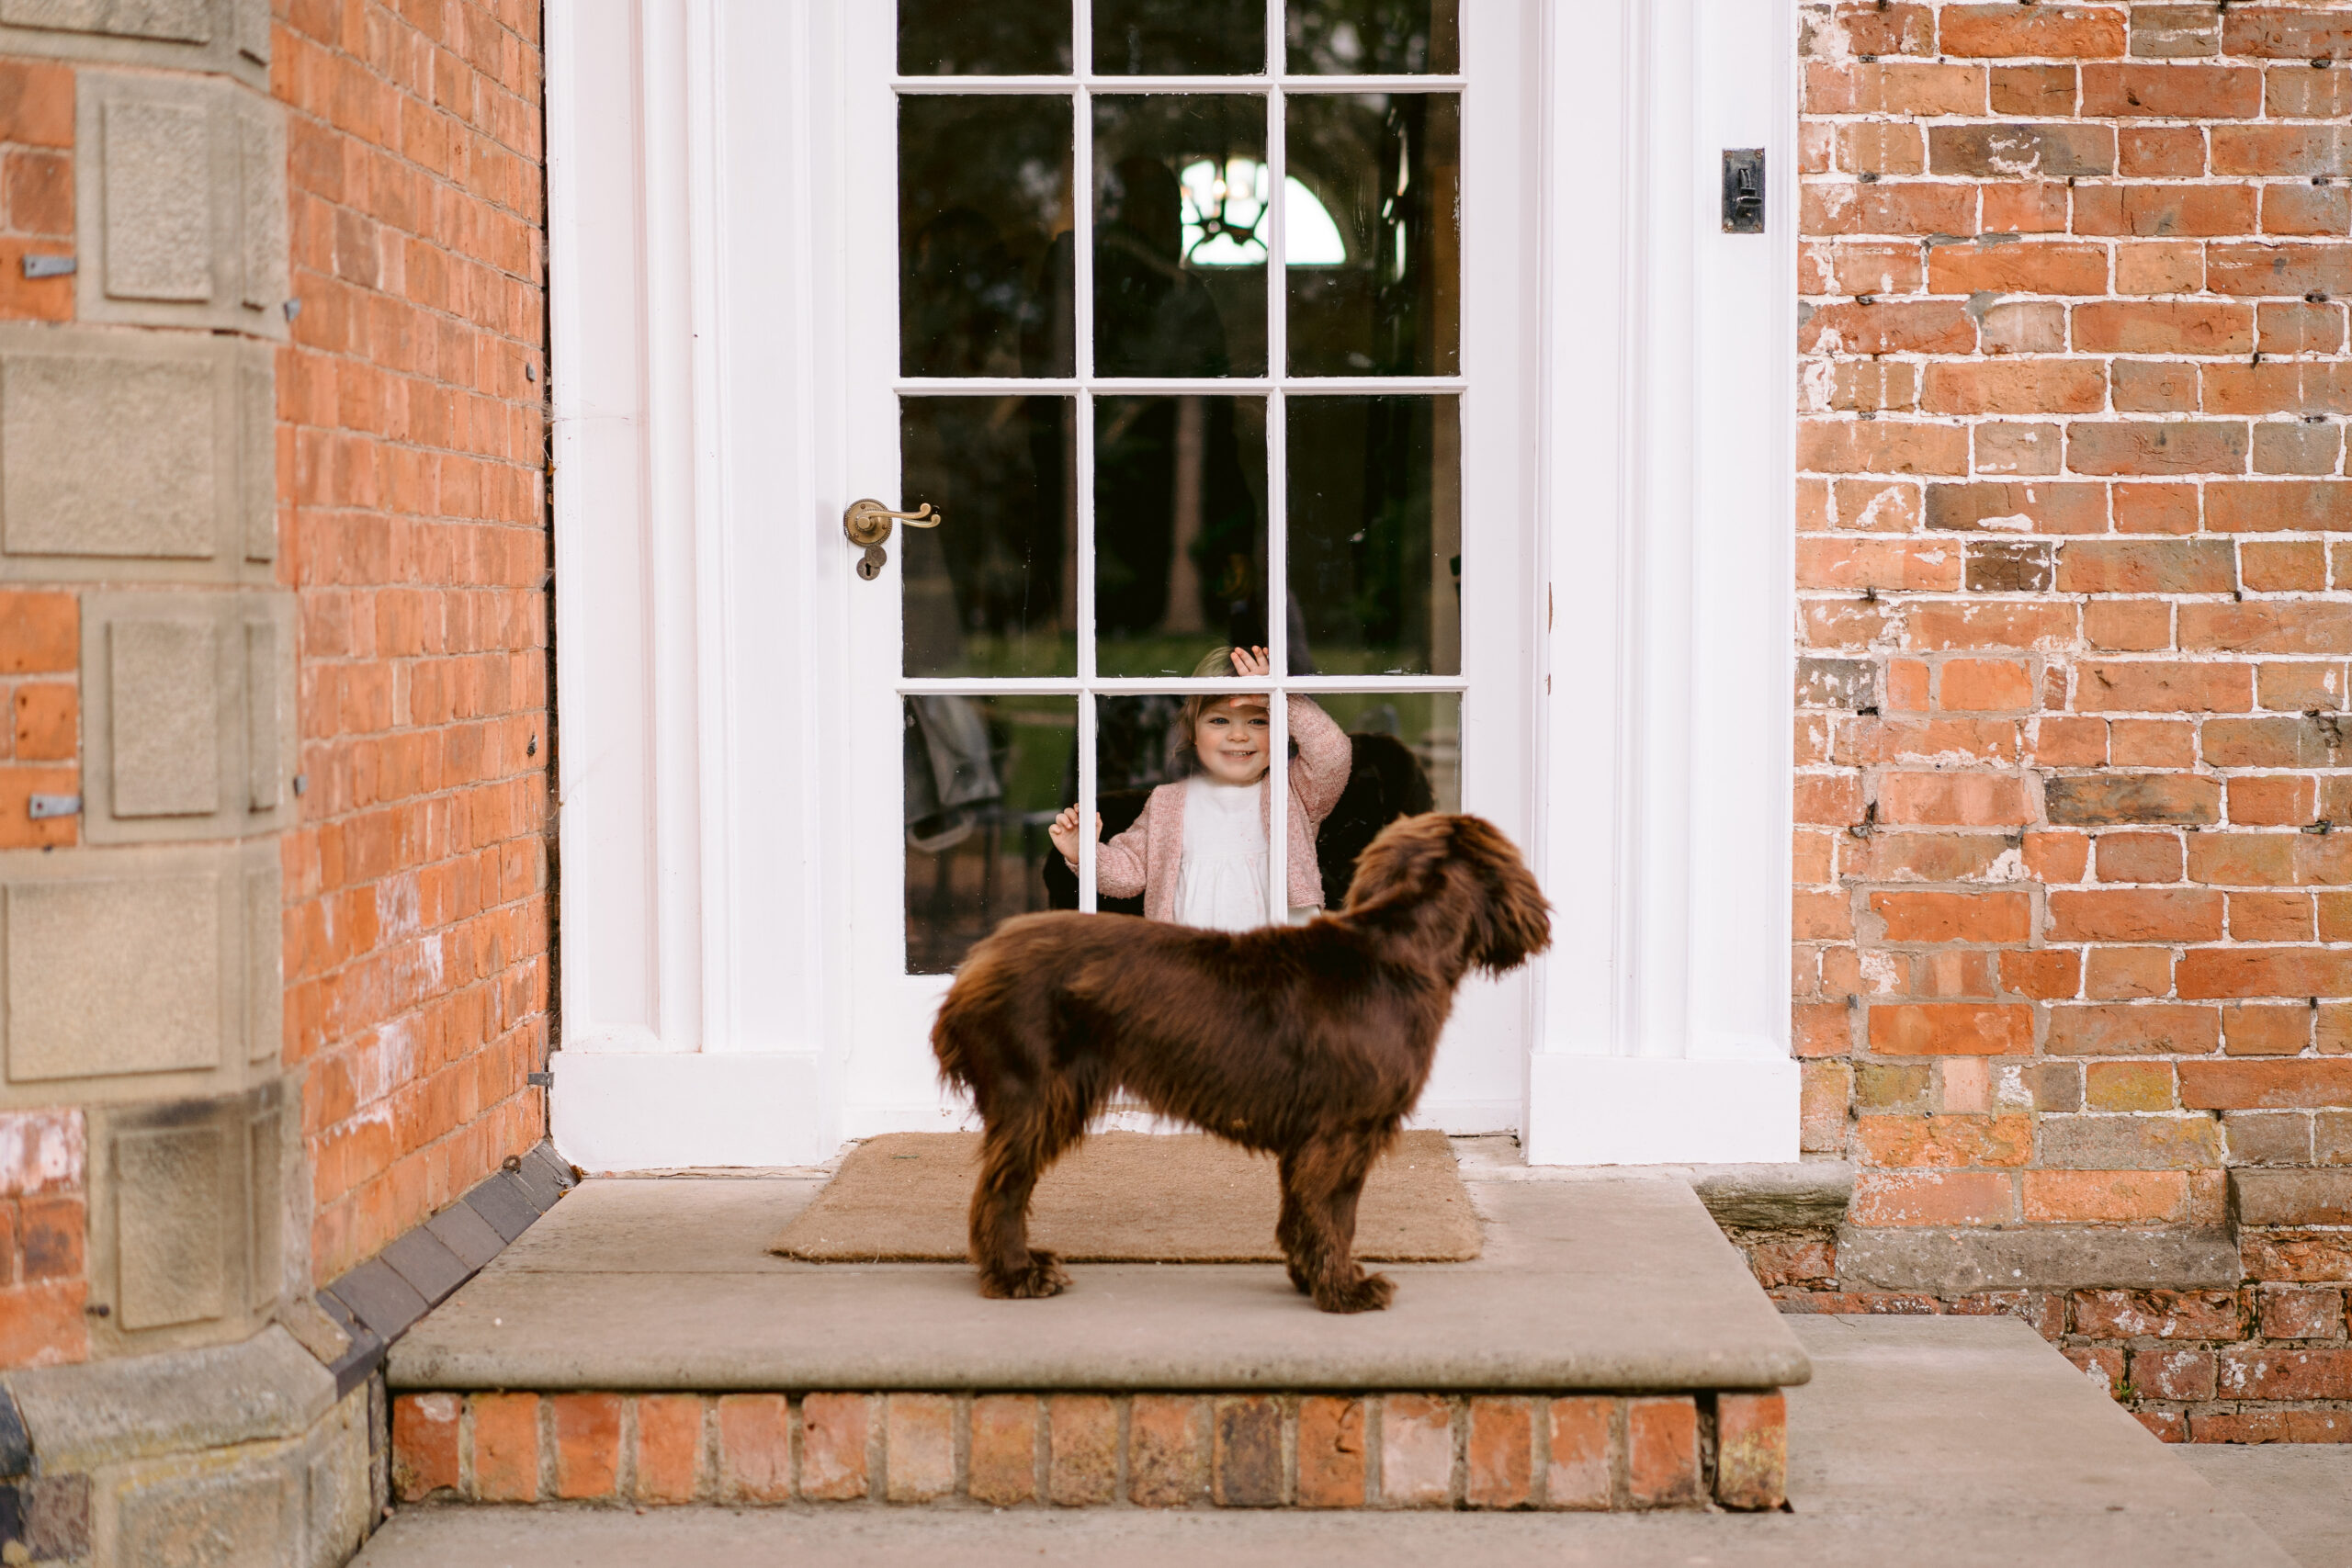 A chocolate brown cocker spaniel stands on an outside back step looking at a small child who is standing inside looking back at the dog